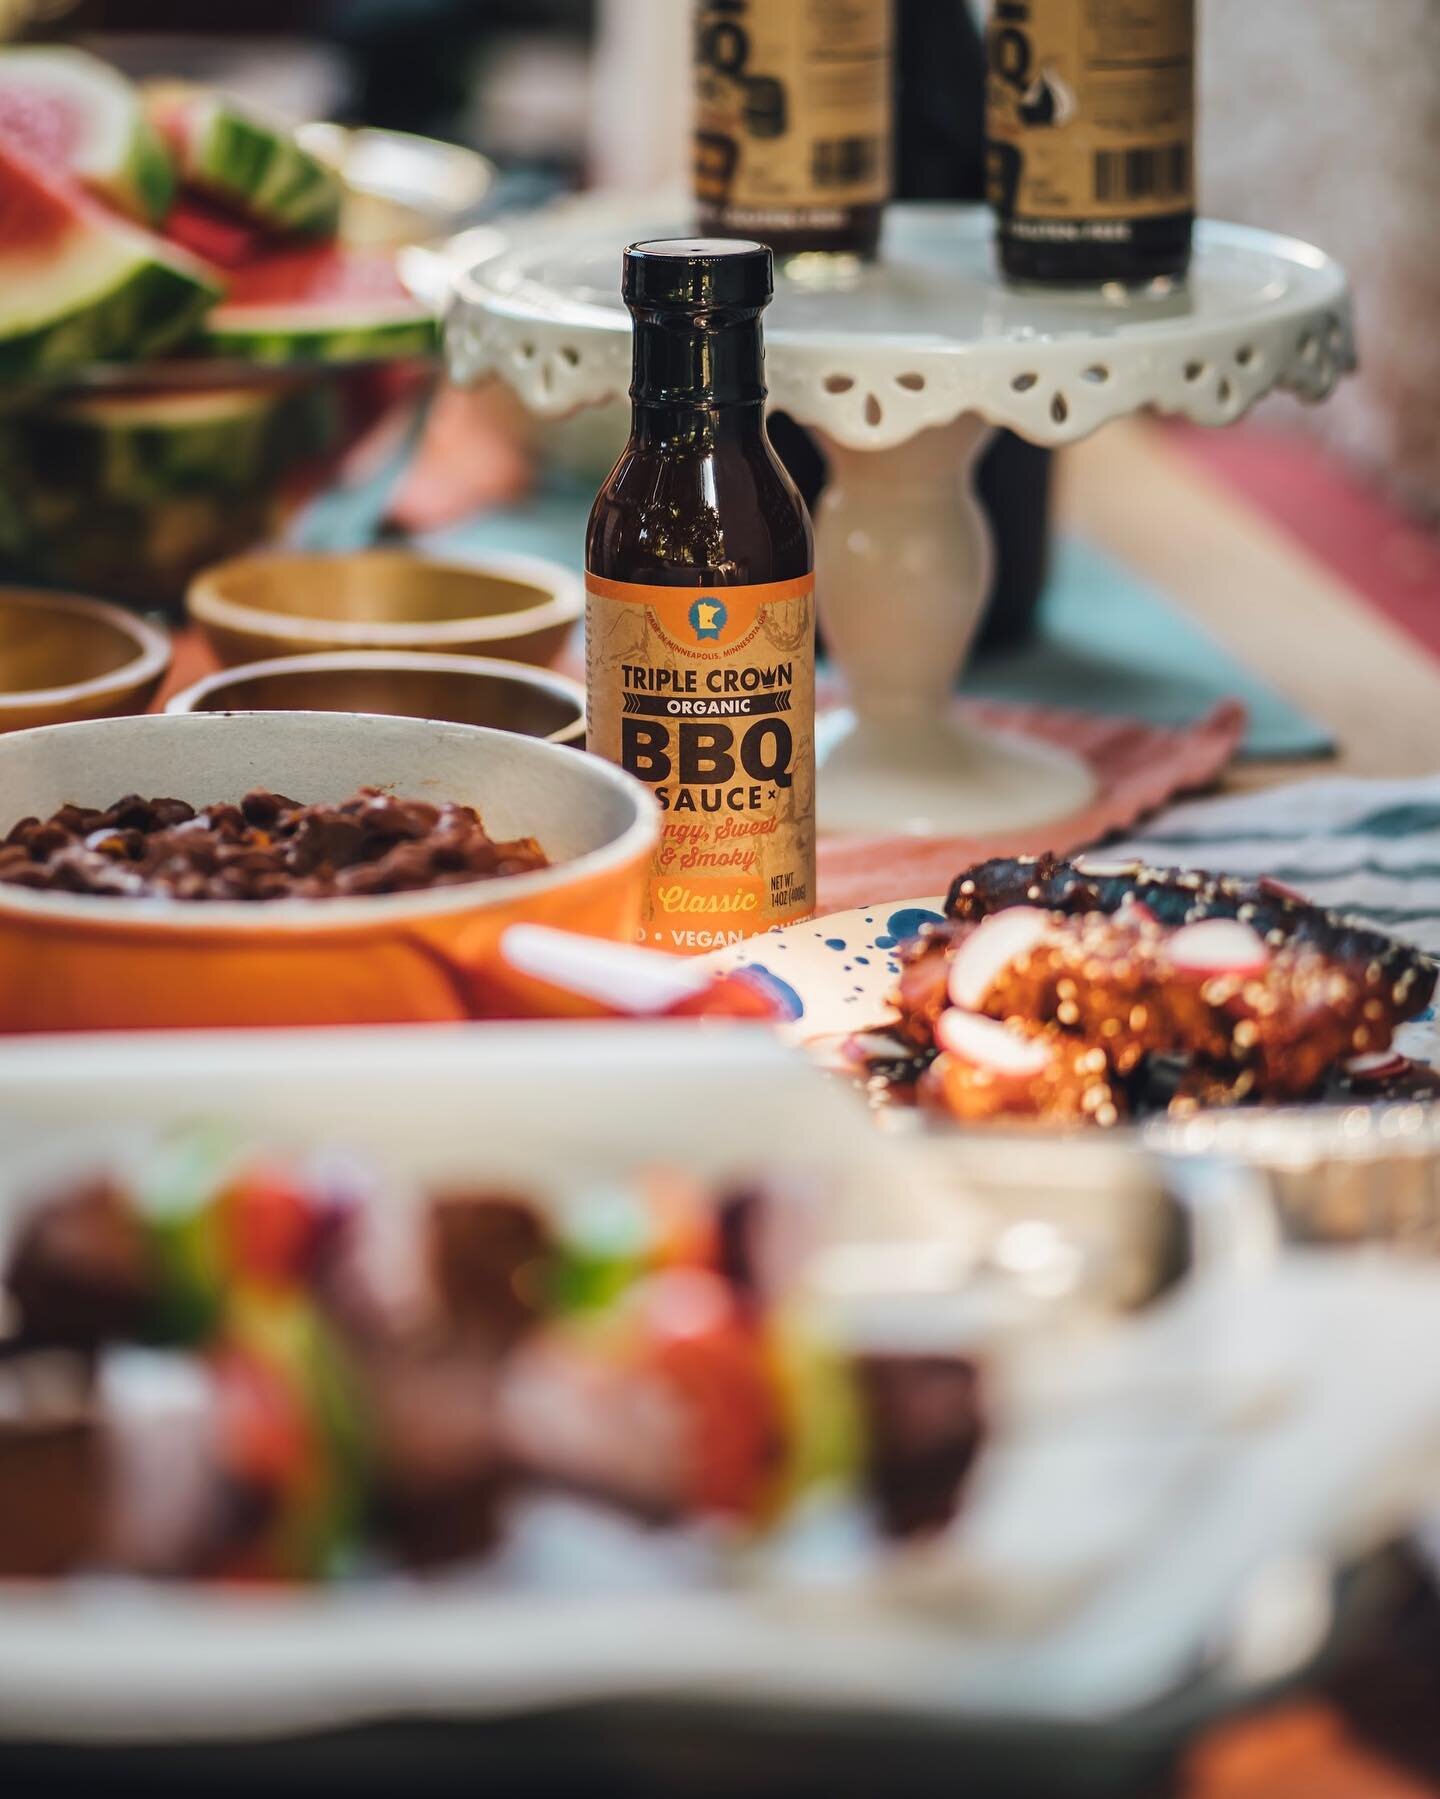 The perfect sauce for any slather 🔥💯
.
.
.
.
.
#triplecrown #triplecrownbbqsauce #bbq #bbqsauce #barbecue #foodie #food #organic #minneaopolis #minnesota #wisconsin #chicago #wholefoods #local #mnmade #grilling #grill #party #mnfoodie #mnfoodies #m